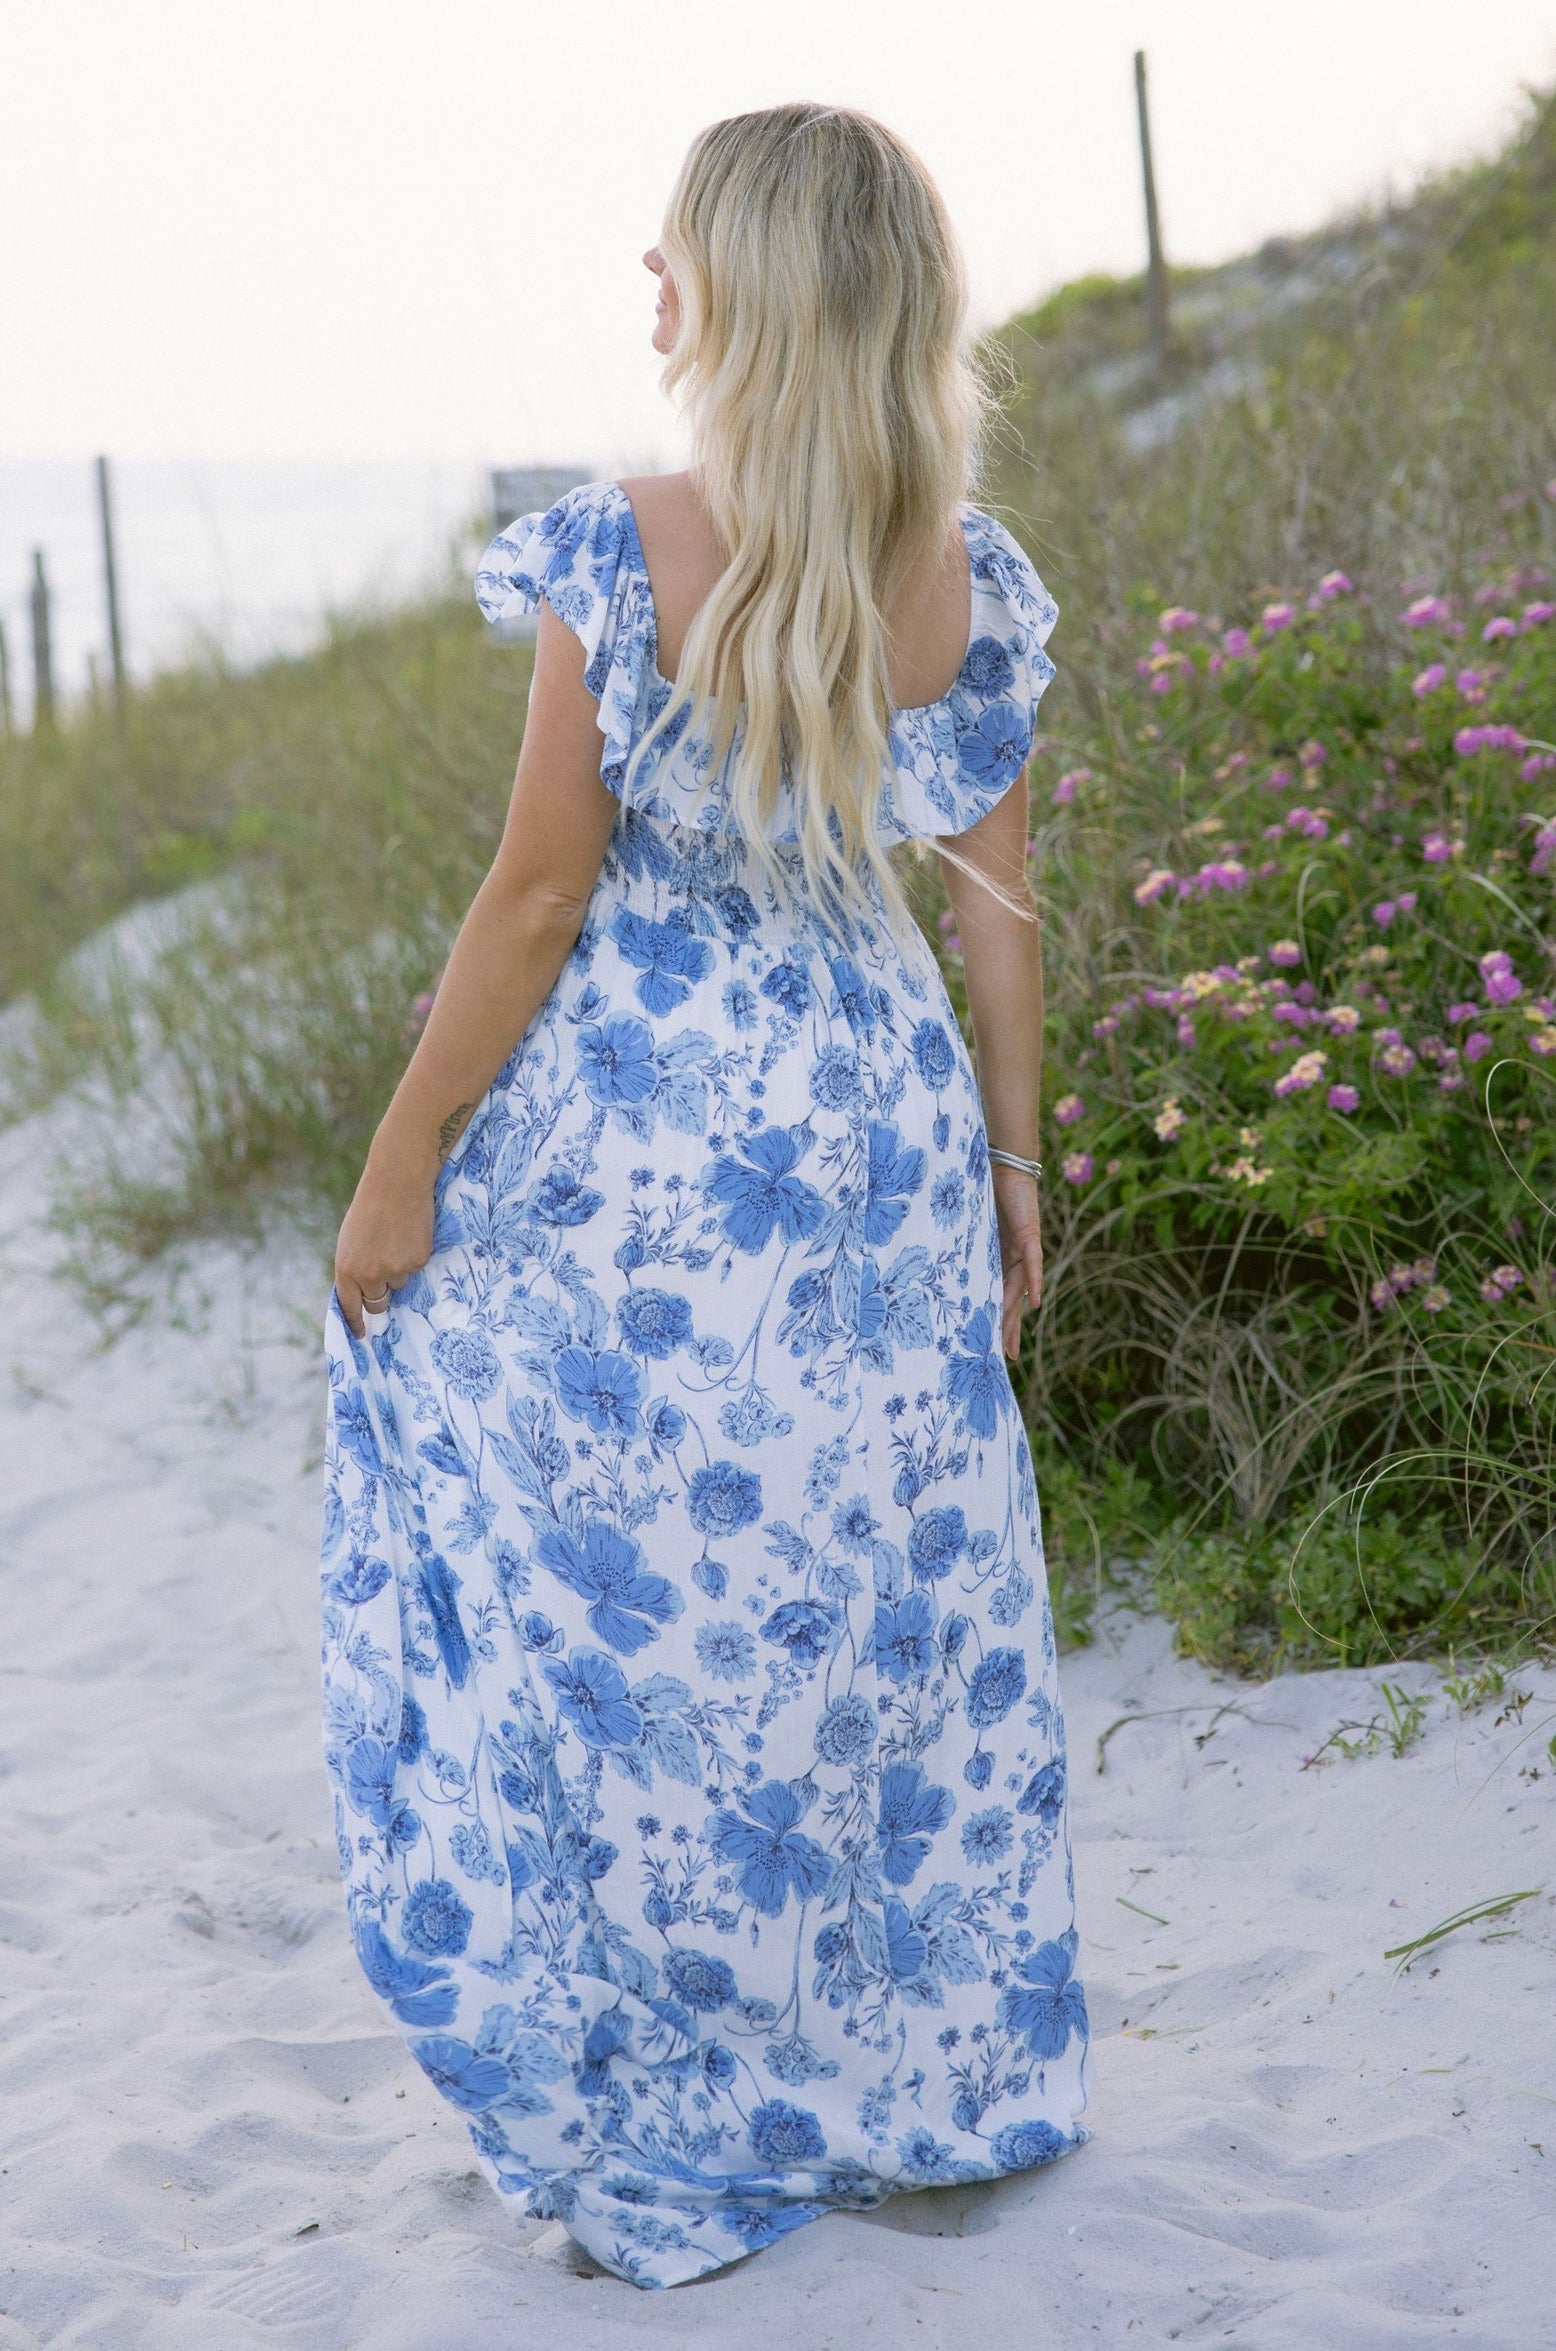 Full body back view of female model wearing the Camila White & Blue Floral Ruffle Maxi Dress which features Blue and White Floral Print, Maxi Skirt, Slit Detail, White Lining, Smocked Upper and Ruffle Straps